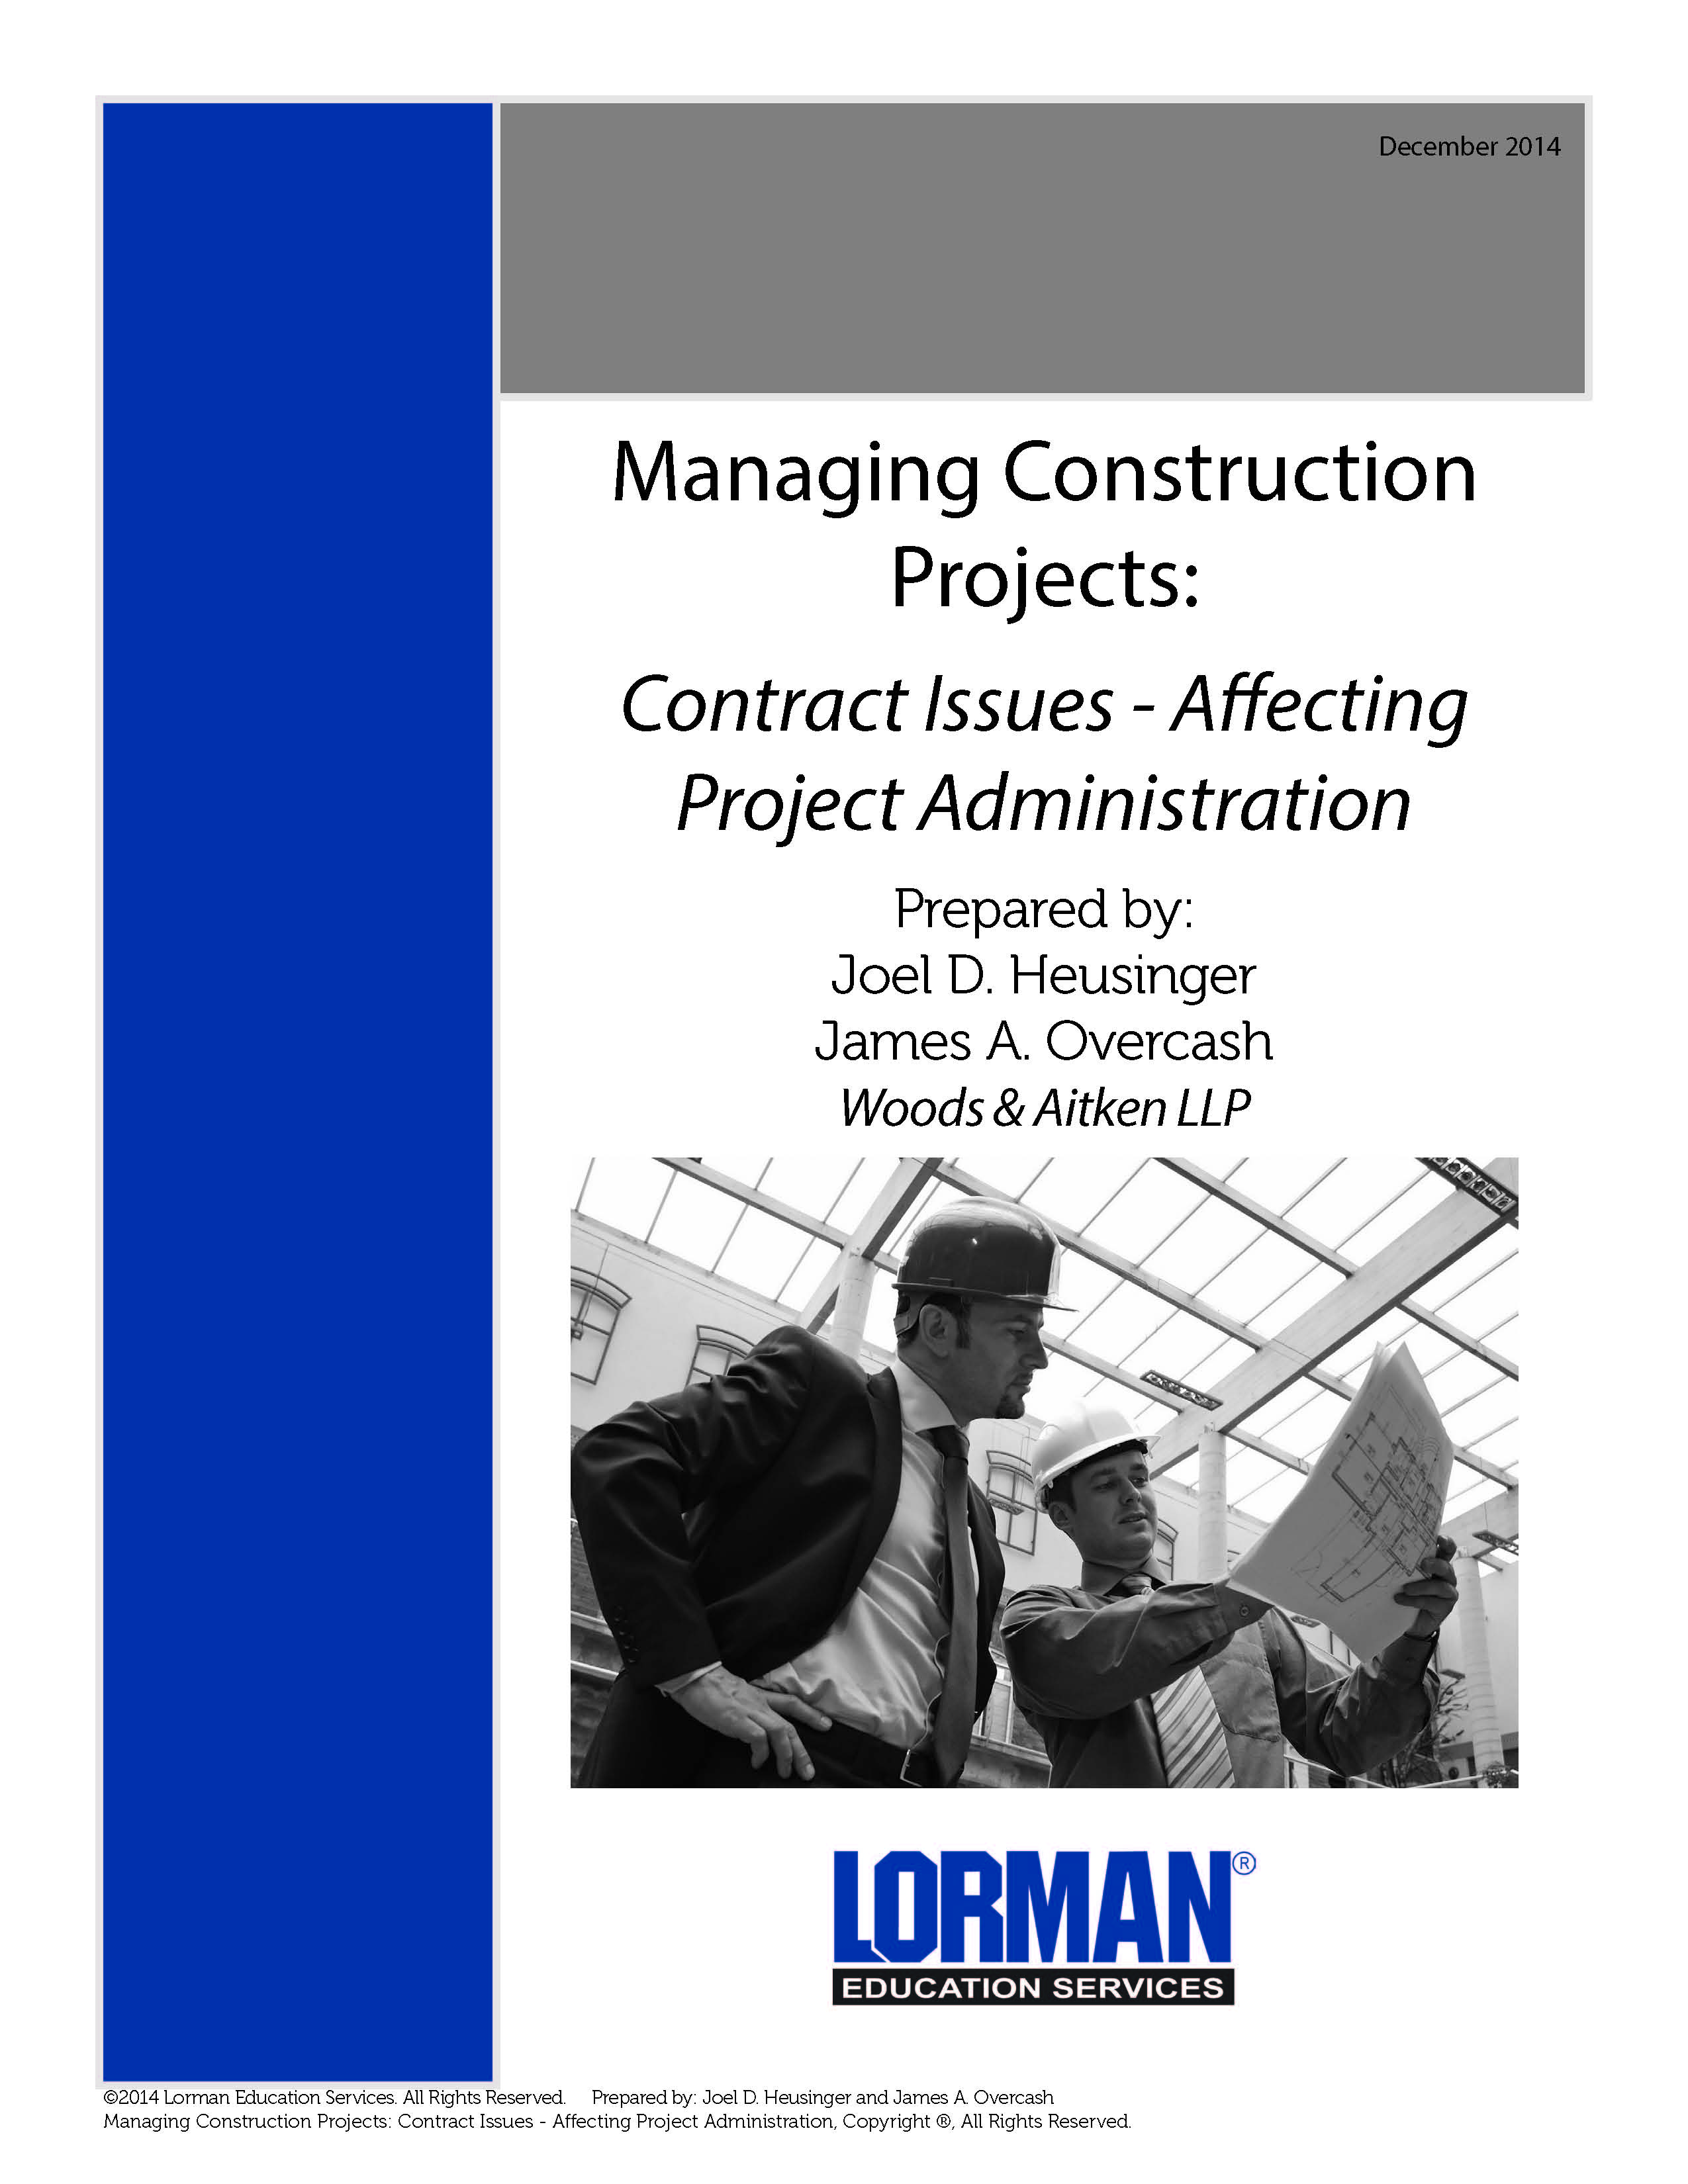 Managing Construction Projects: Contract Issues - Affecting Project Administration